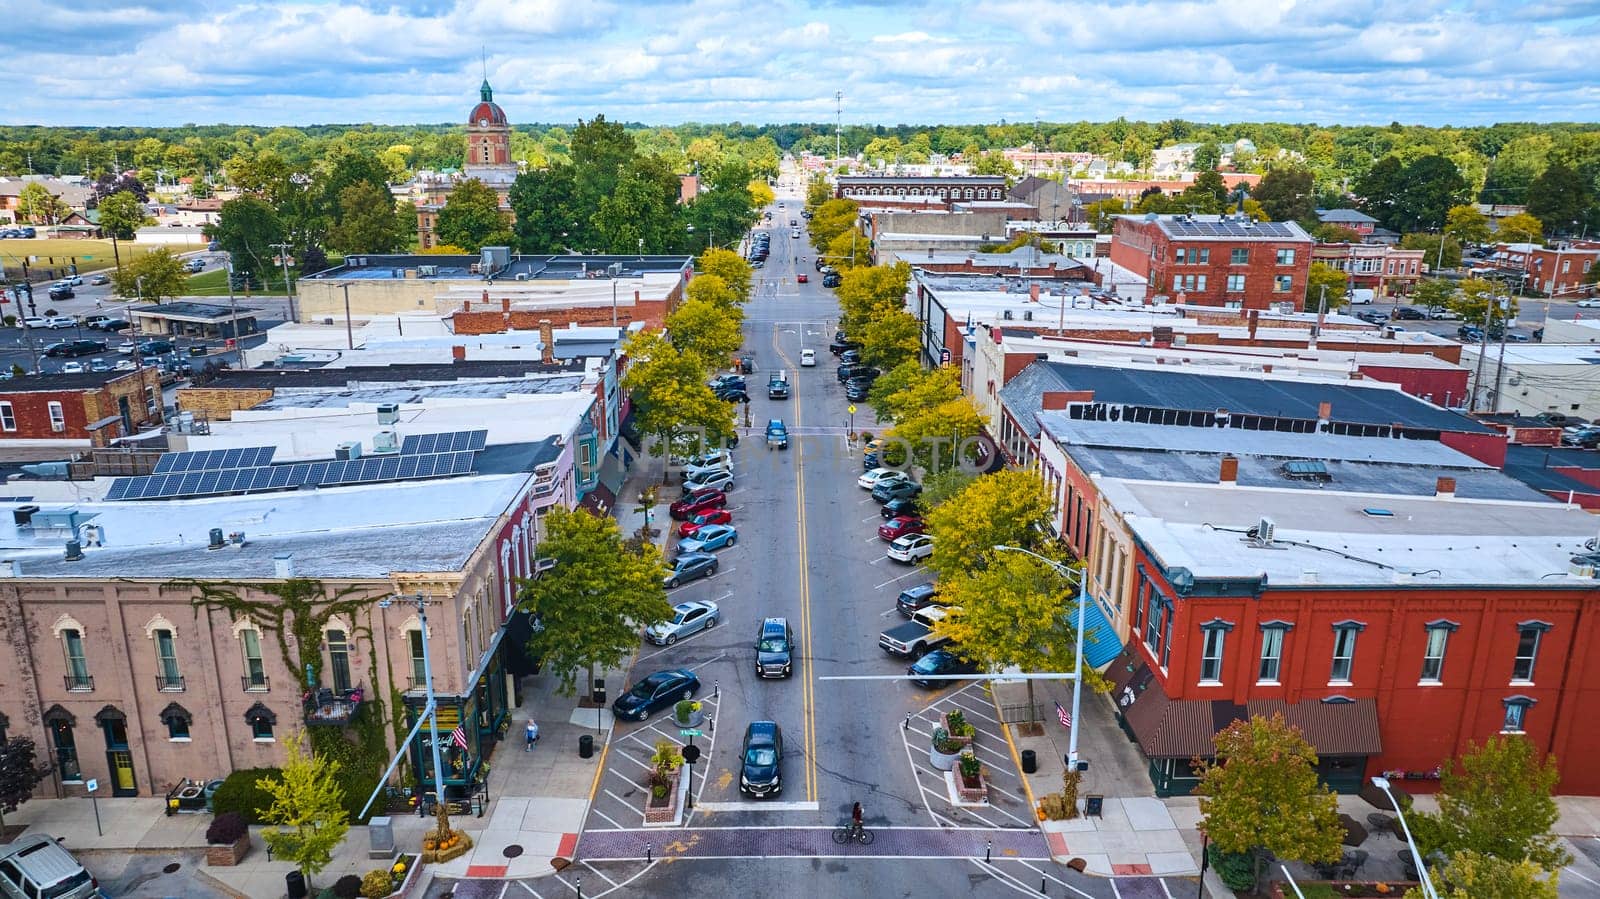 Aerial view of historic downtown Goshen, Indiana, showcasing a bustling main street lined with red brick buildings, the distinctive Elkhart County Courthouse, and the charm of small-town America during autumn.